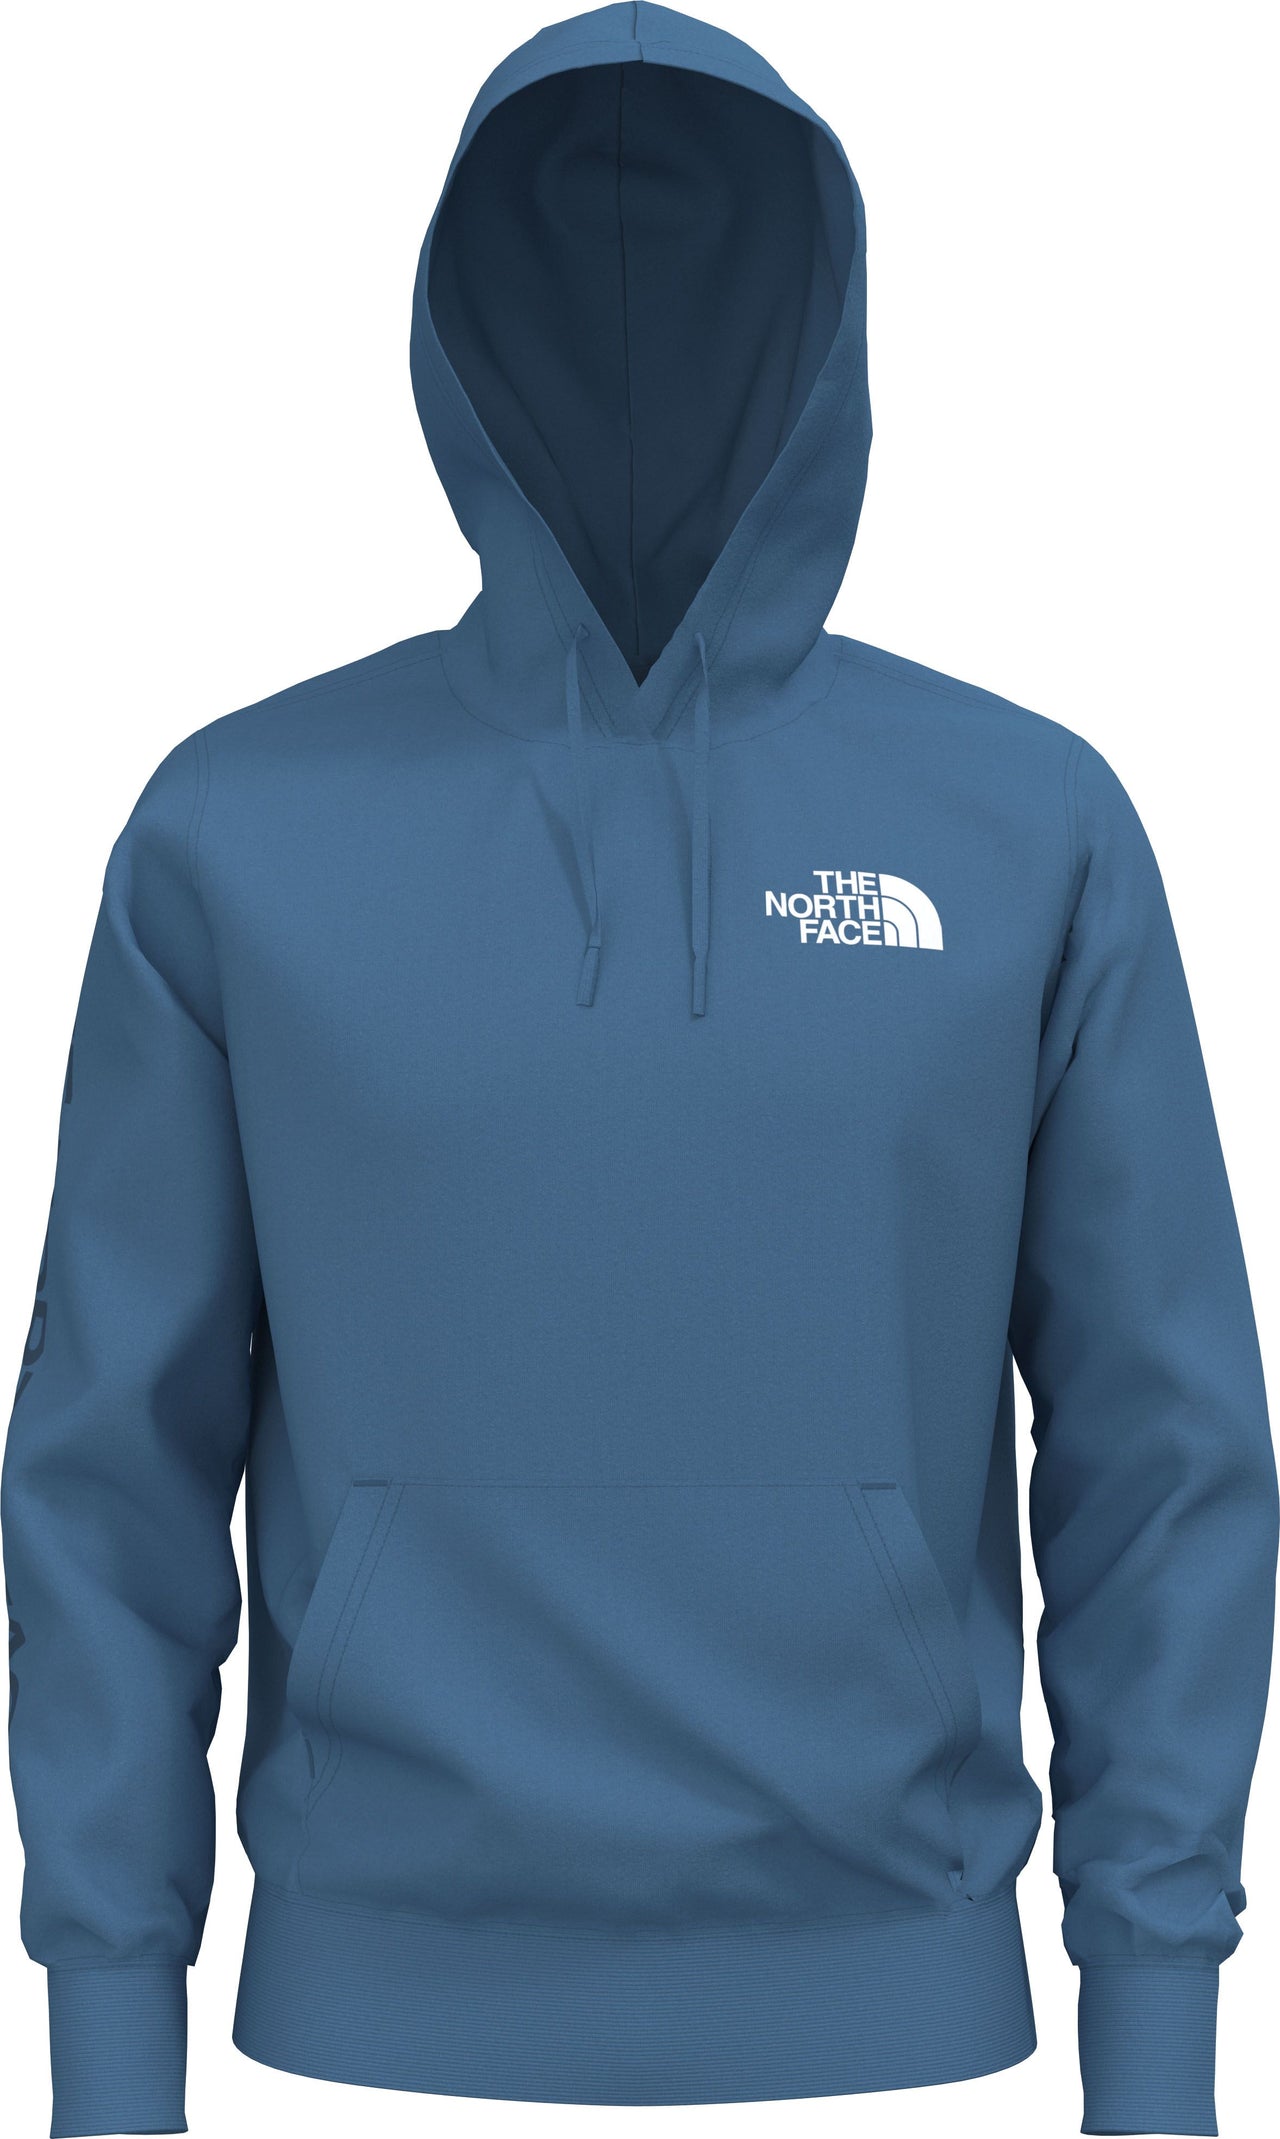 The North Face Apparel Men's New Sleeve Hit Hoodie Banff Blue